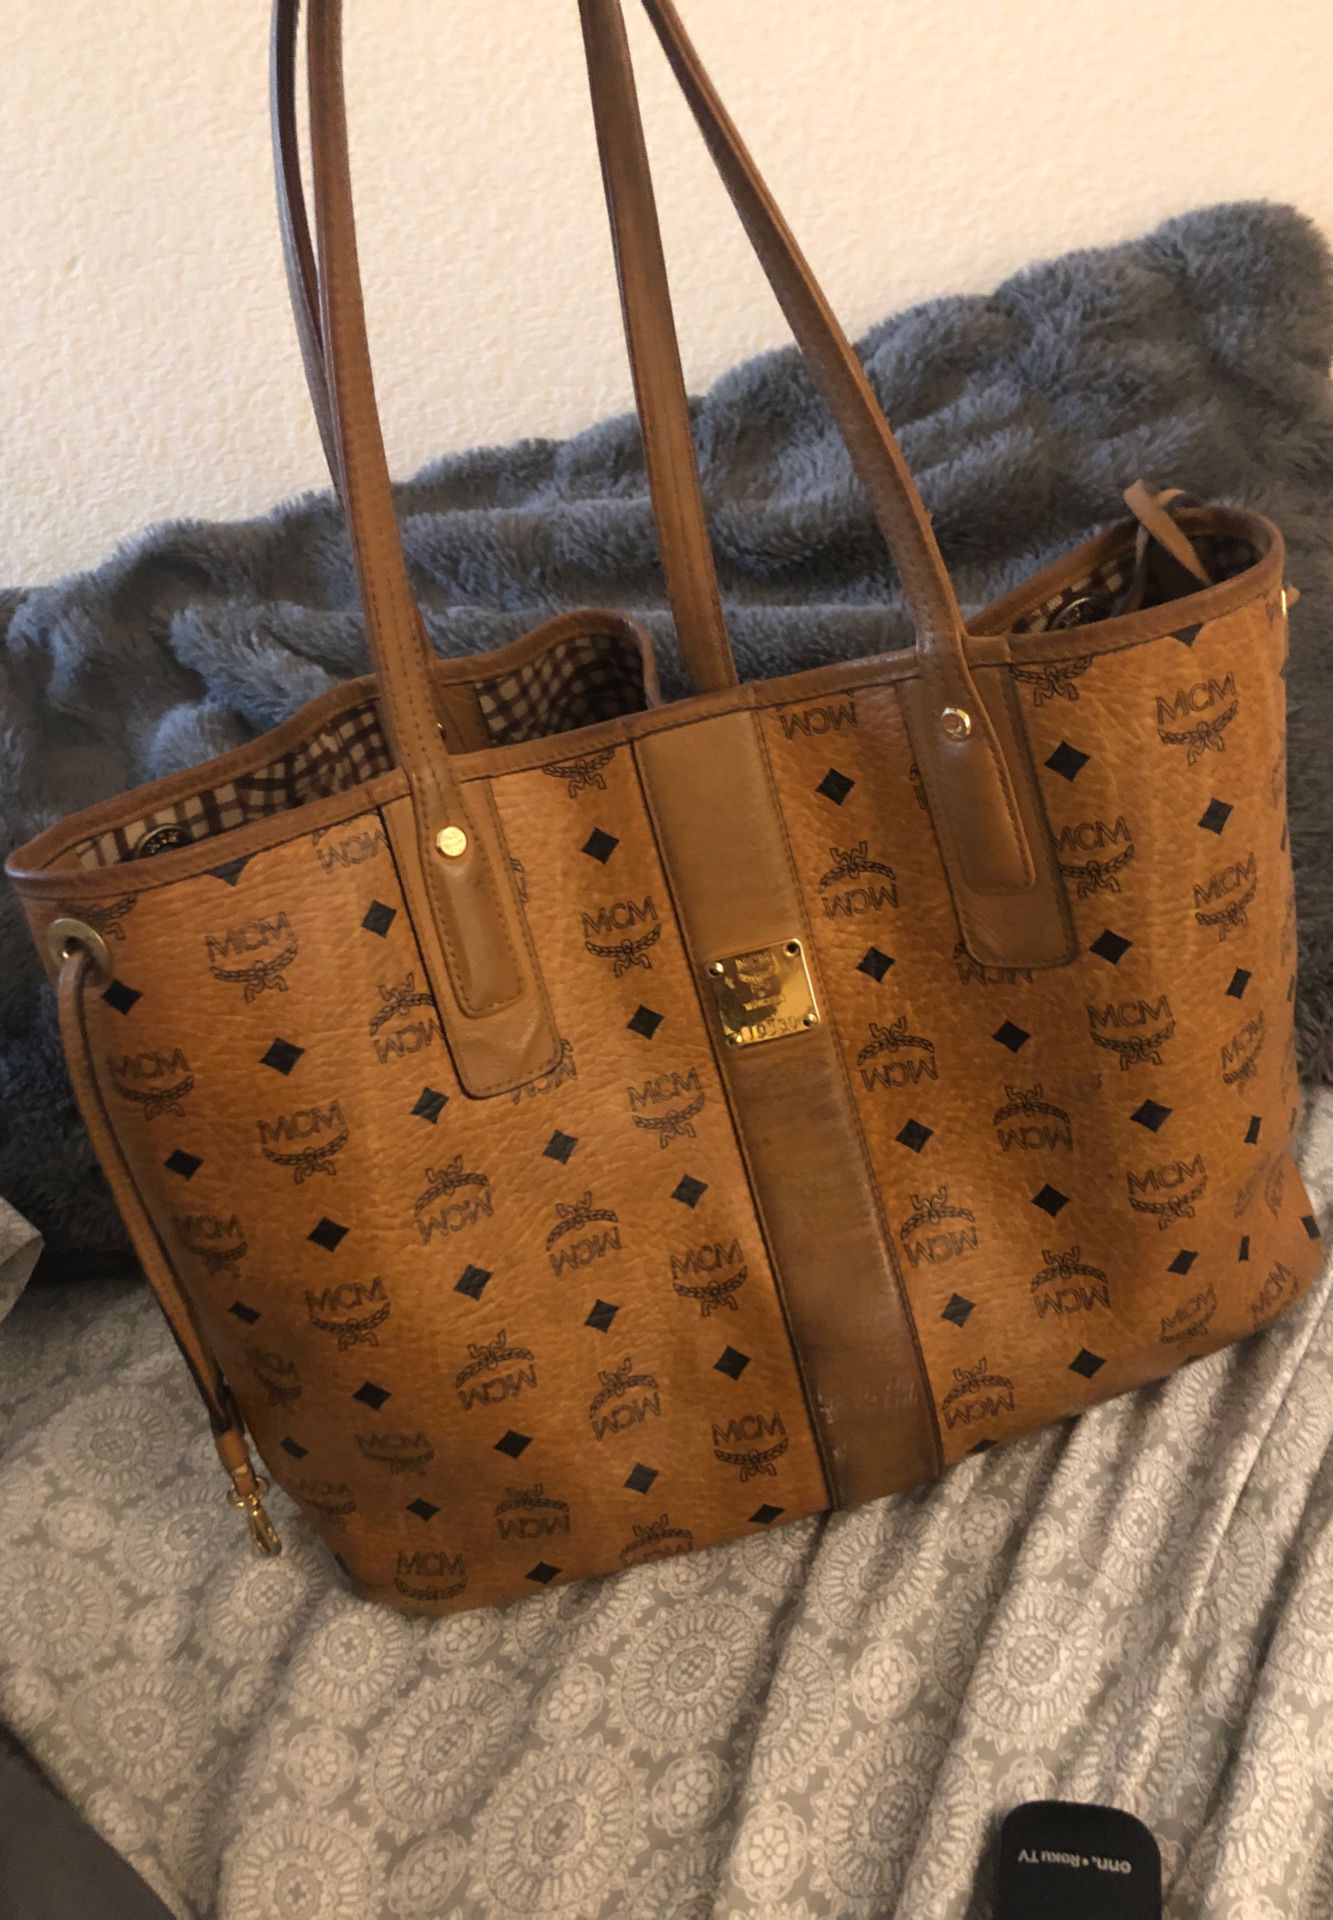 MCM Pink Tote Bag With Matching Wallet for Sale in Las Vegas, NV - OfferUp